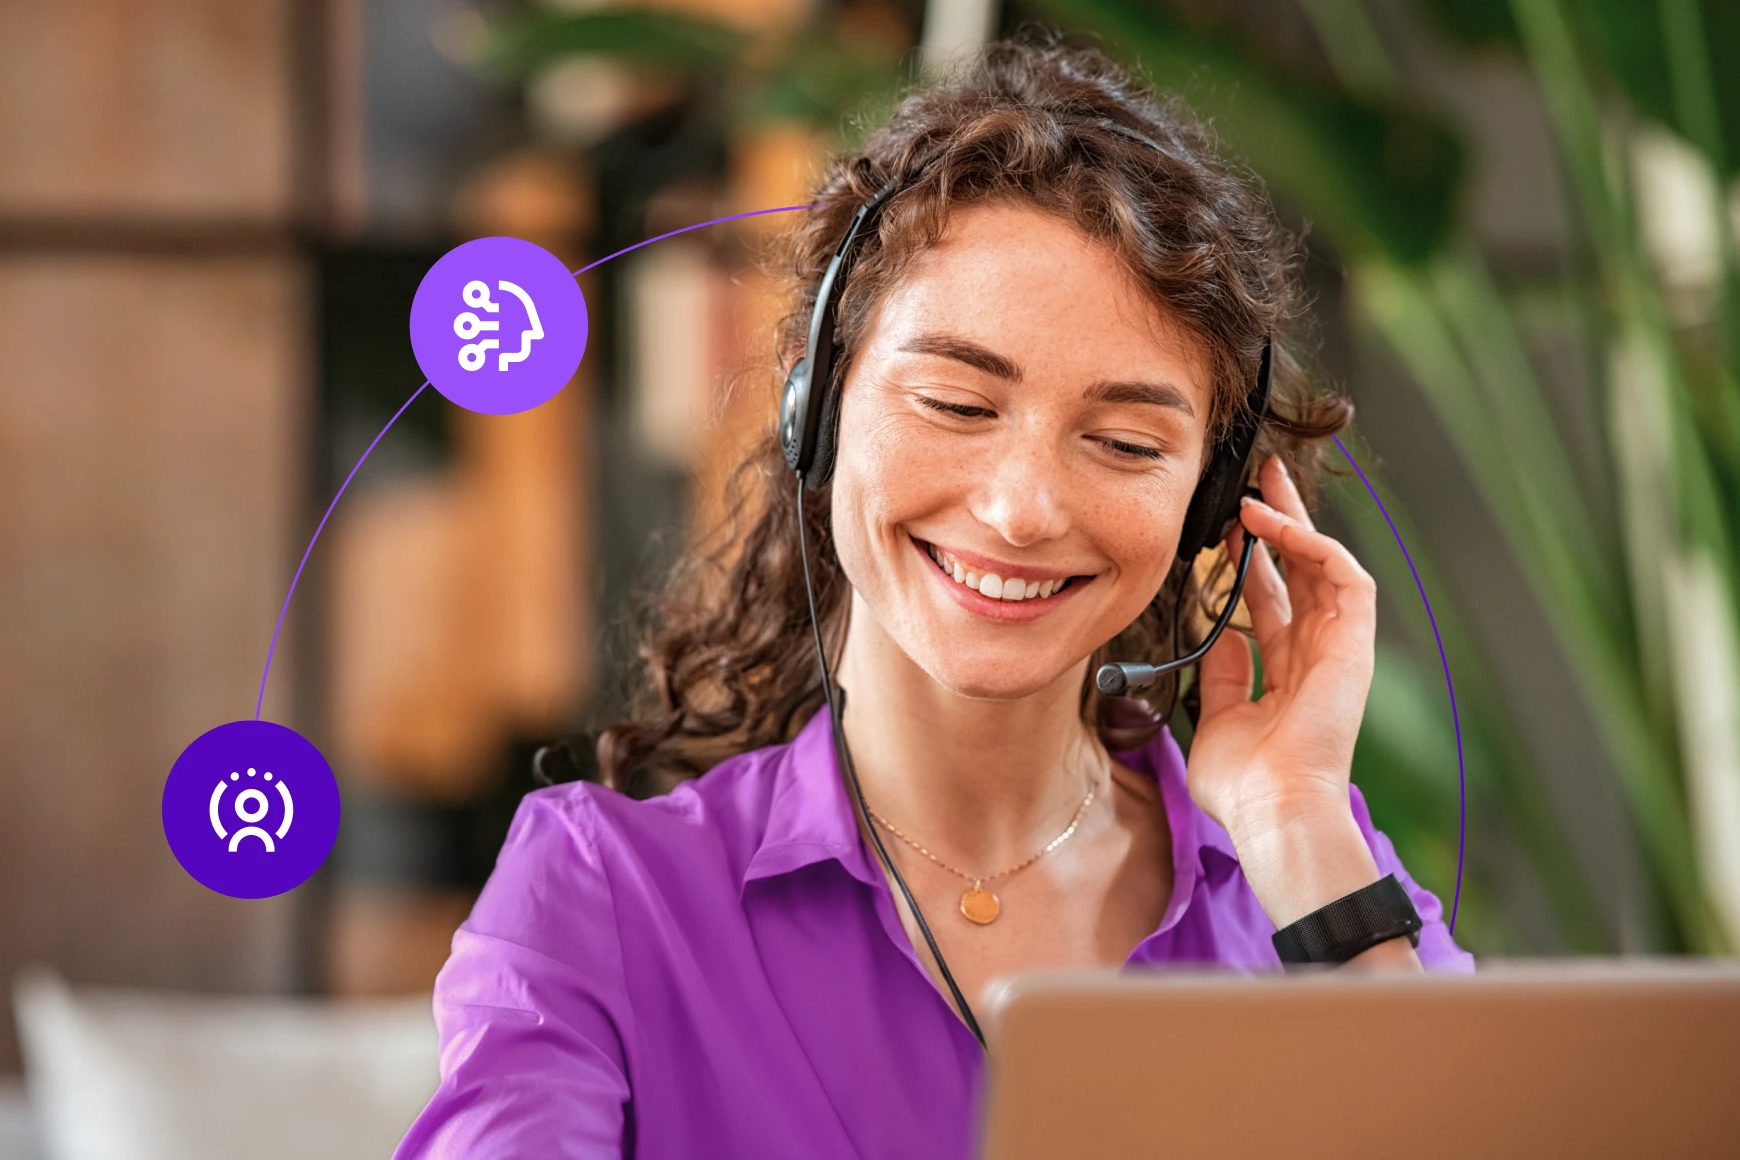 How does AI improve customer service and contact center efficiency?